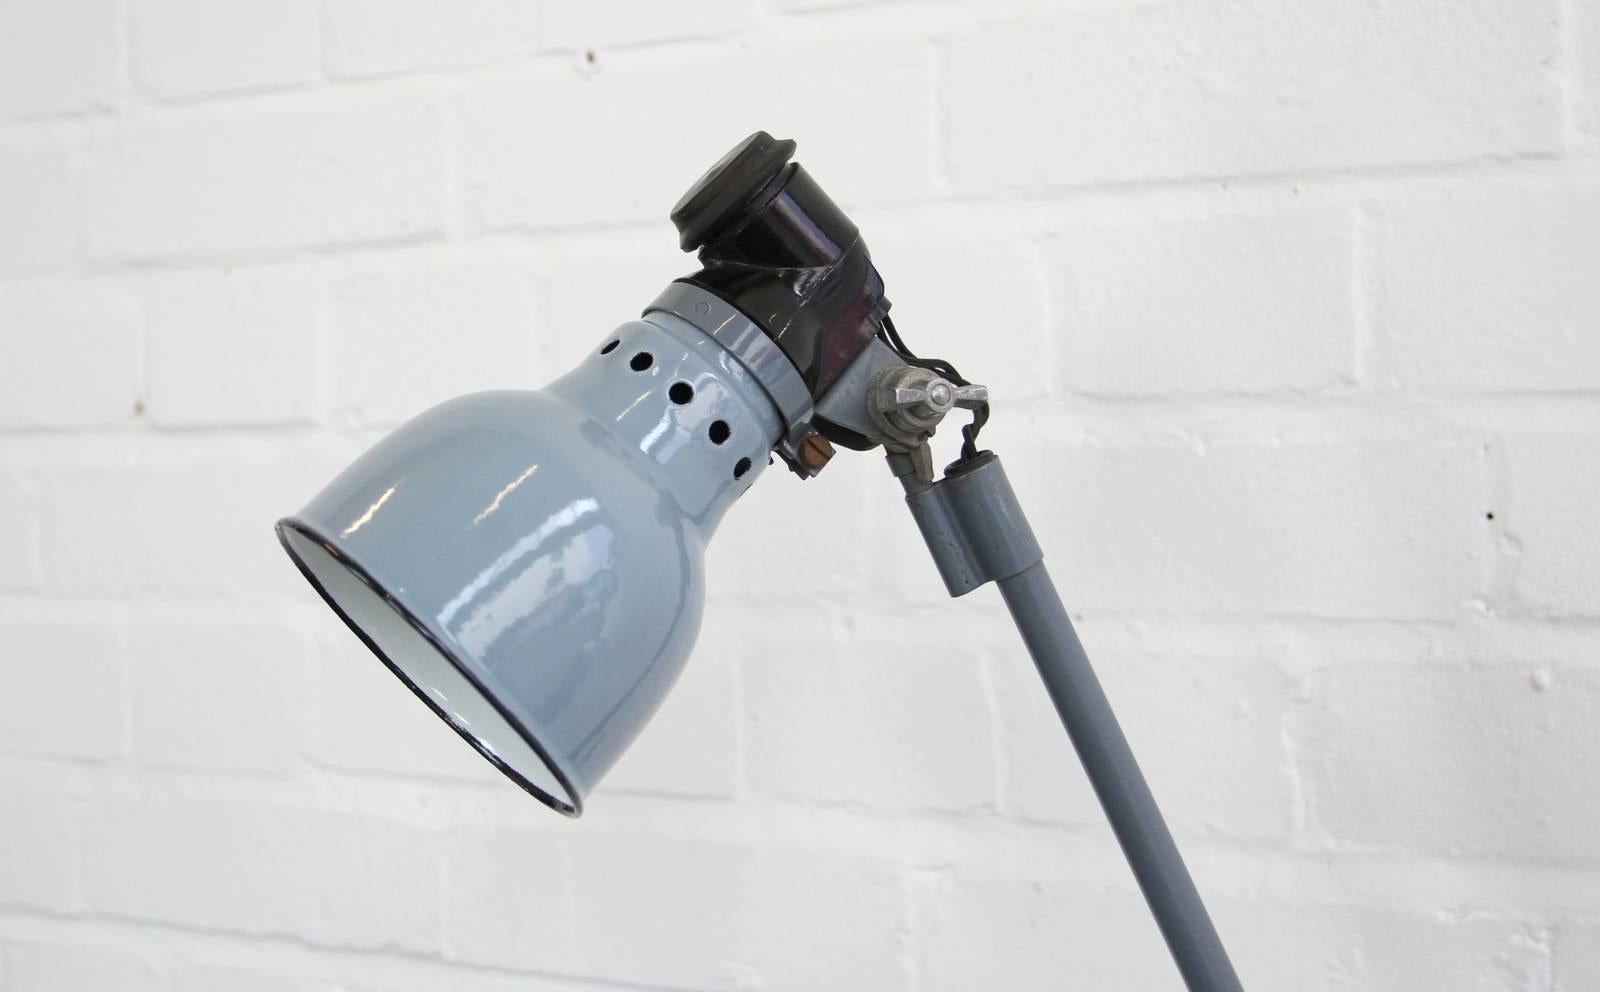 Wall mounted industrial lamp by Ernst Radermacher, circa 1930s.

- Vitreous grey enamel shade
- Black bakelite switch with Embossed 